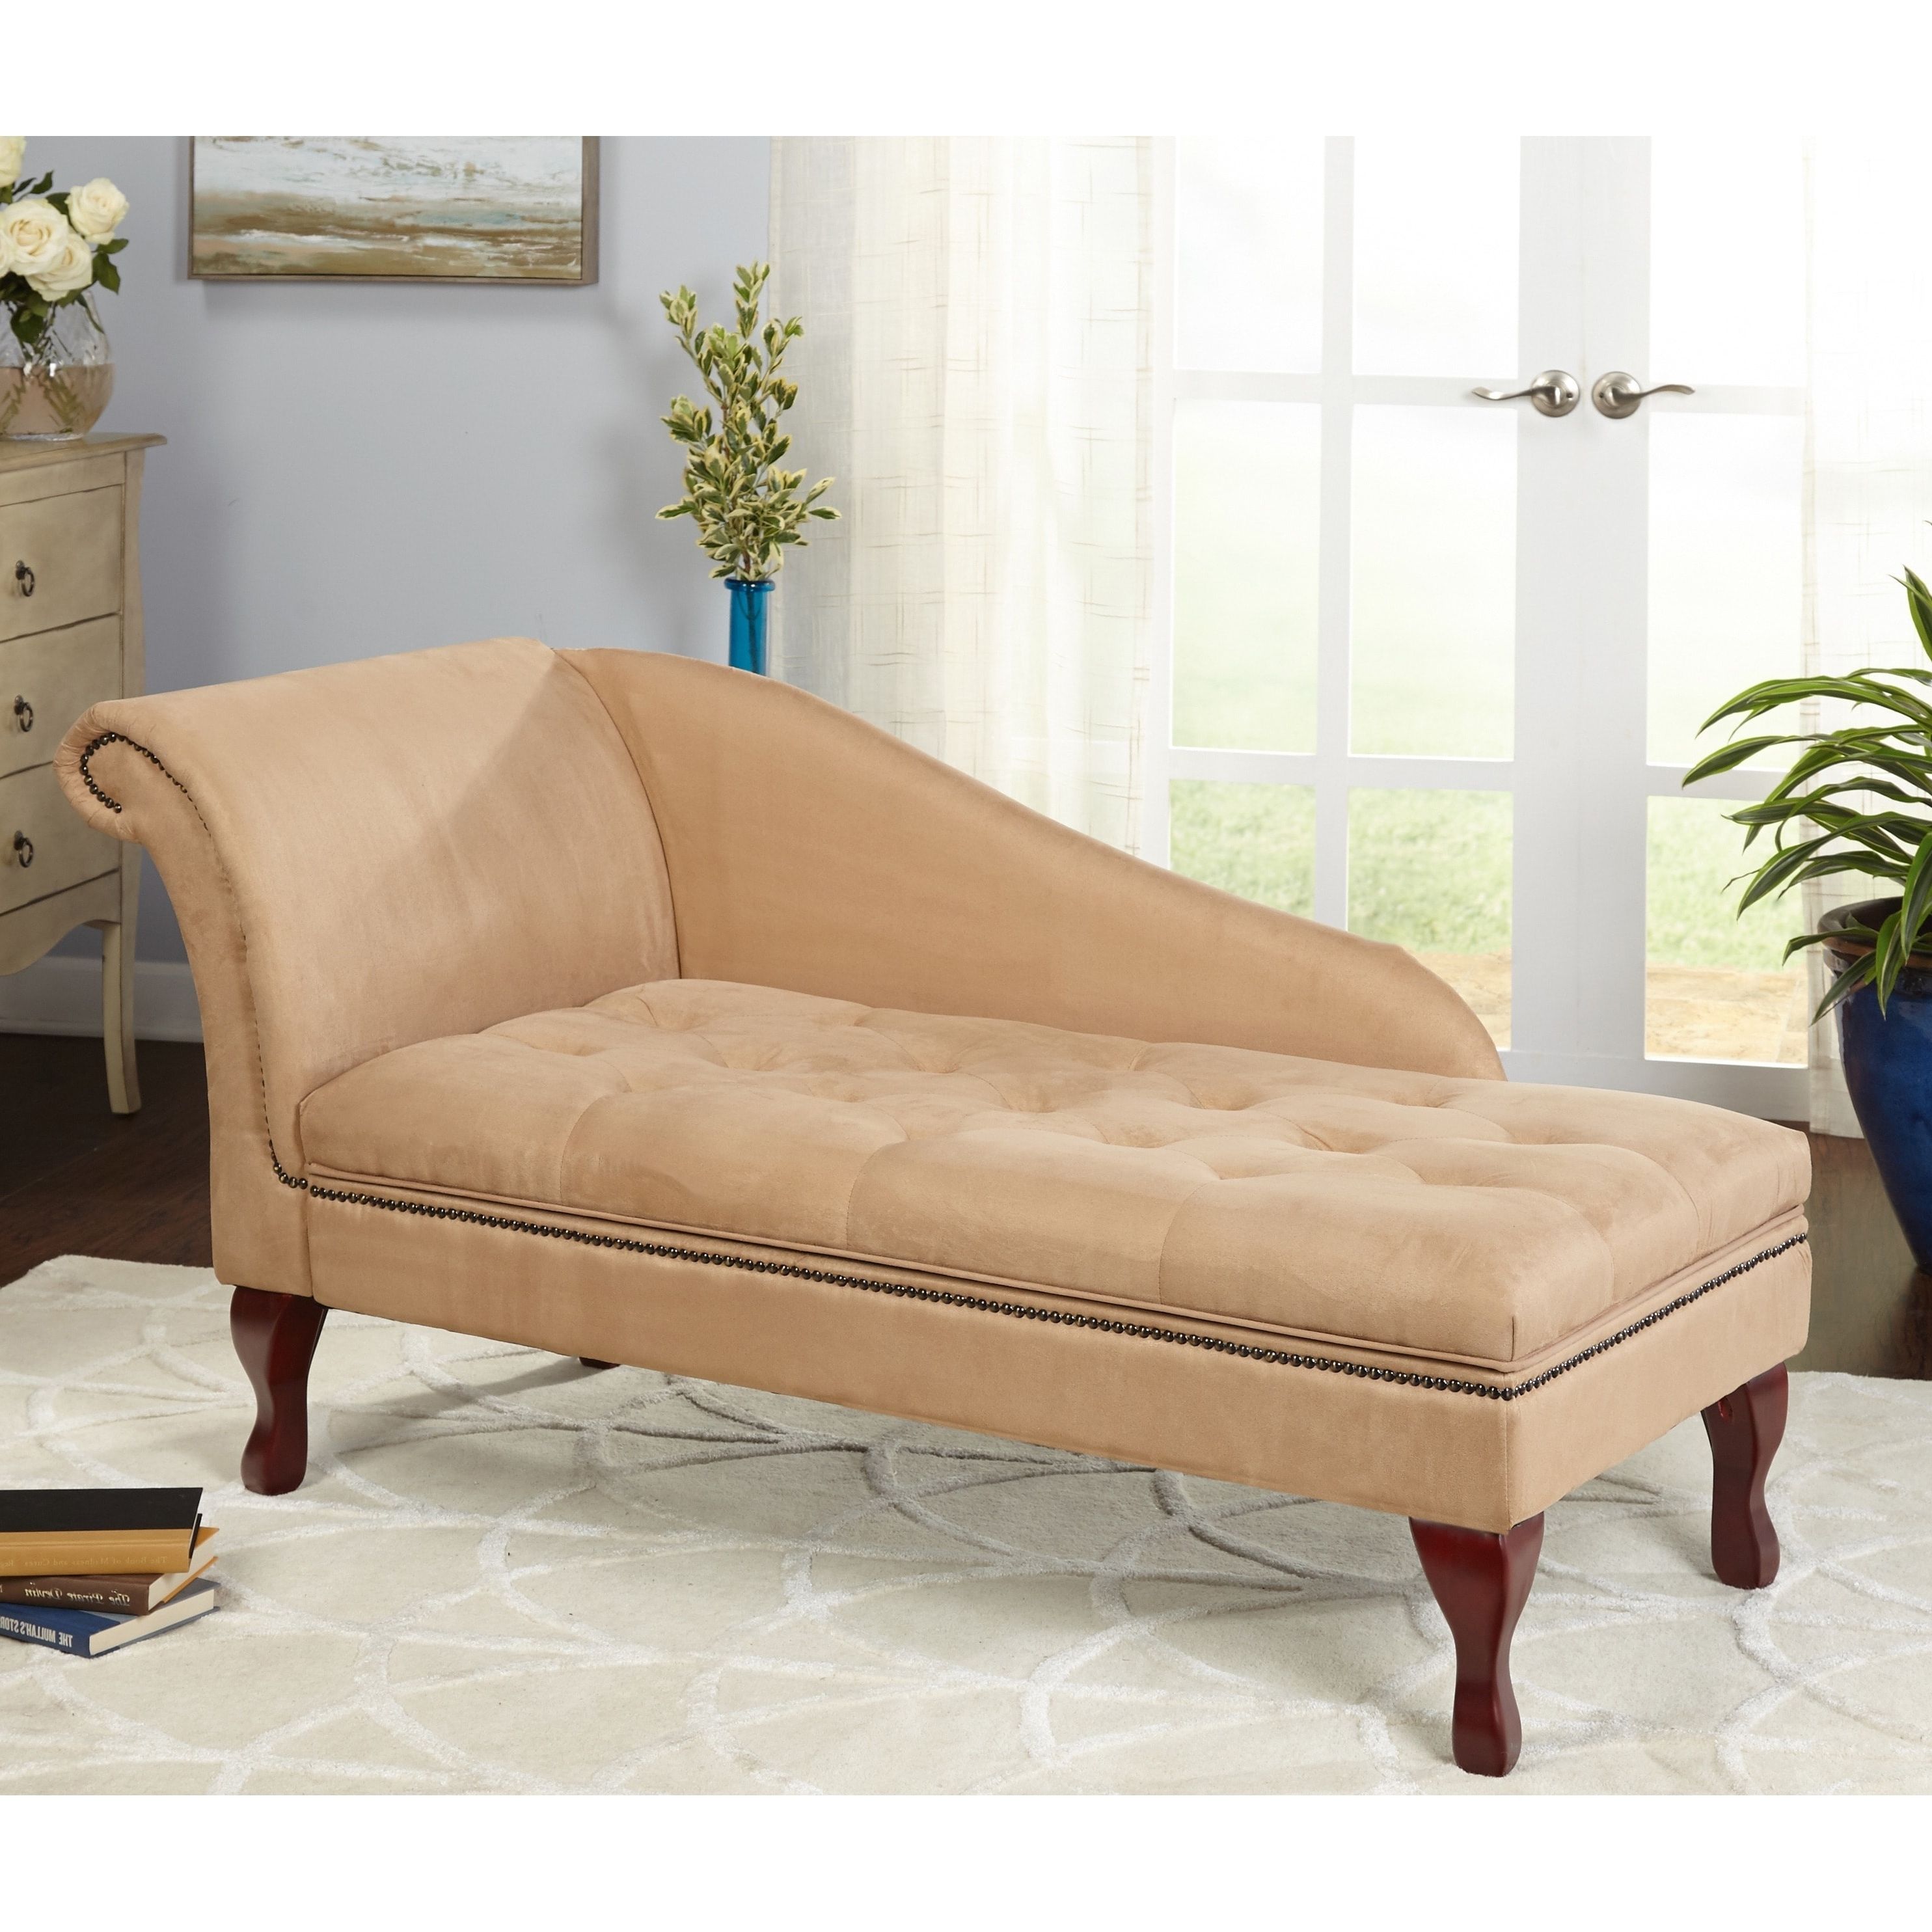 Recent Simple Living Black Storage Chaise Lounge – Free Shipping Today Throughout Chaise Lounges (View 4 of 15)